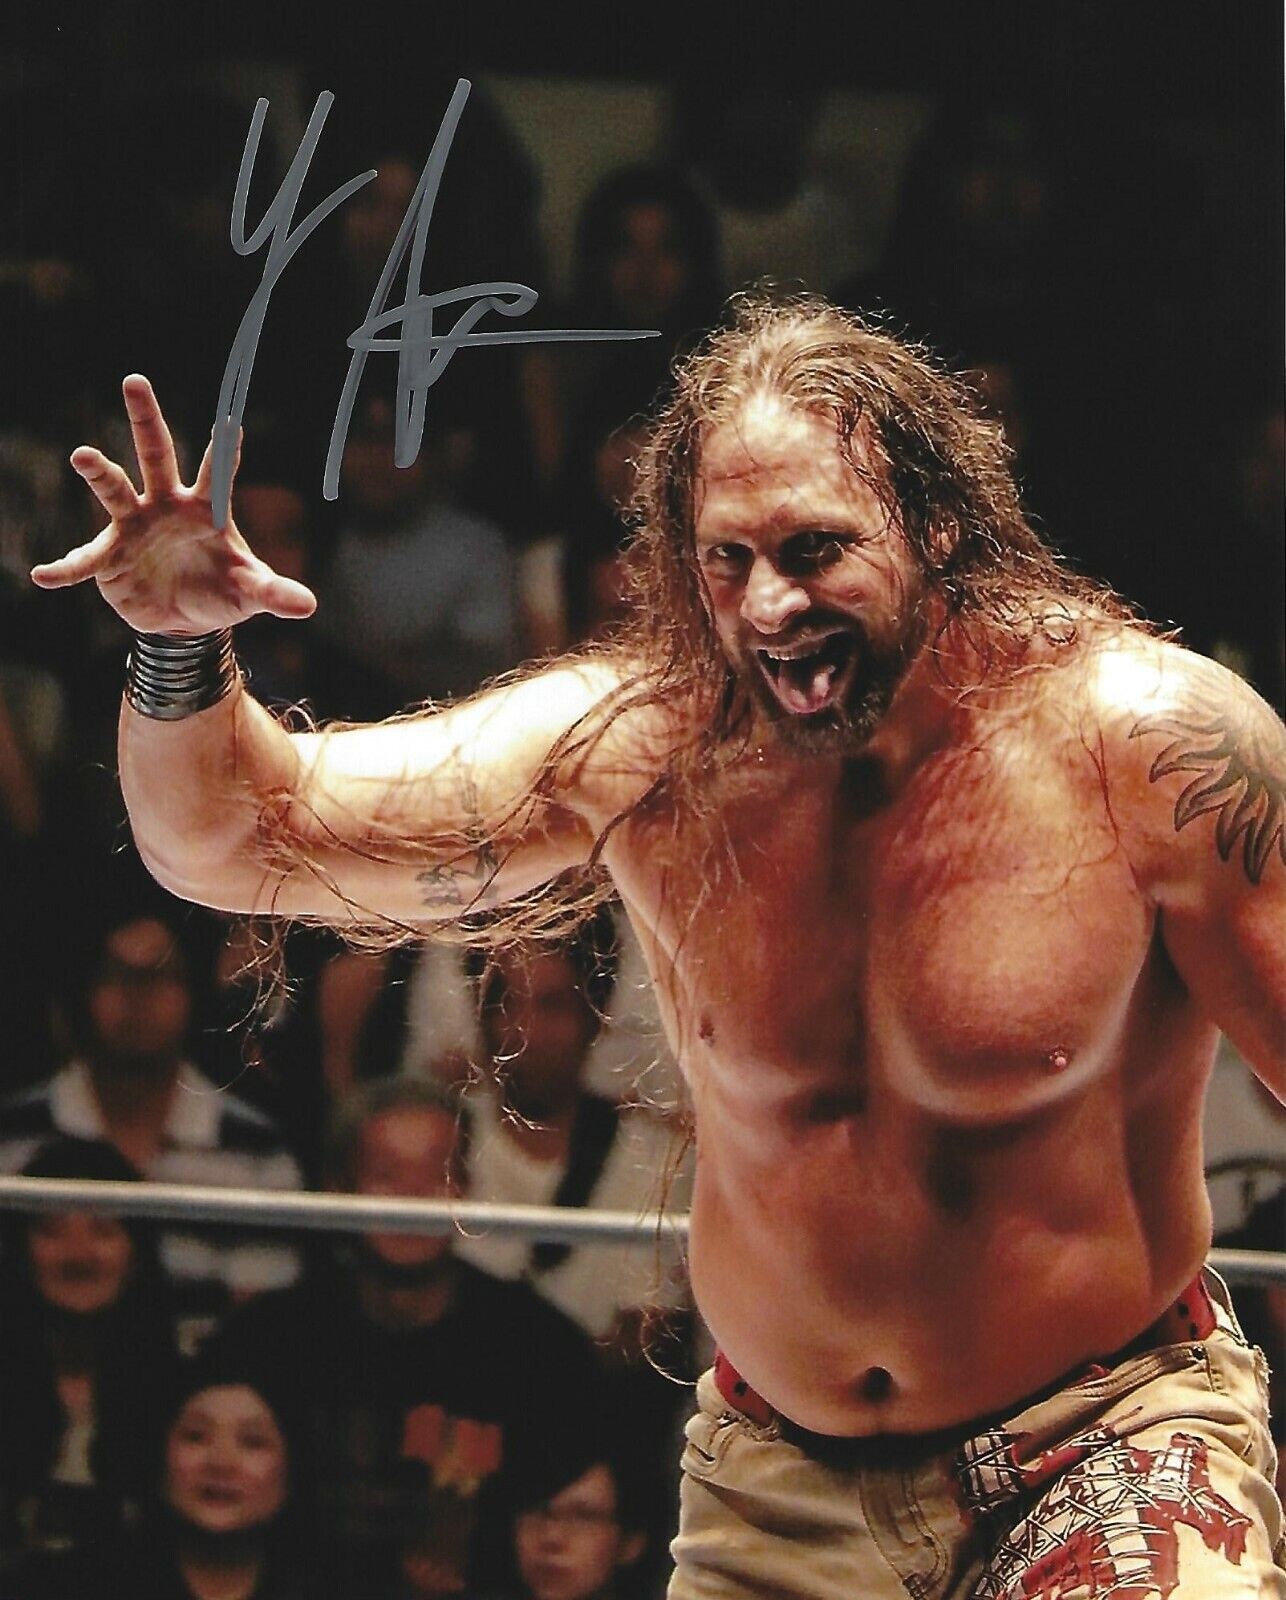 Lance Archer Signed 8x10 Photo Poster painting New Japan Pro Wrestling Picture Autograph KES 8